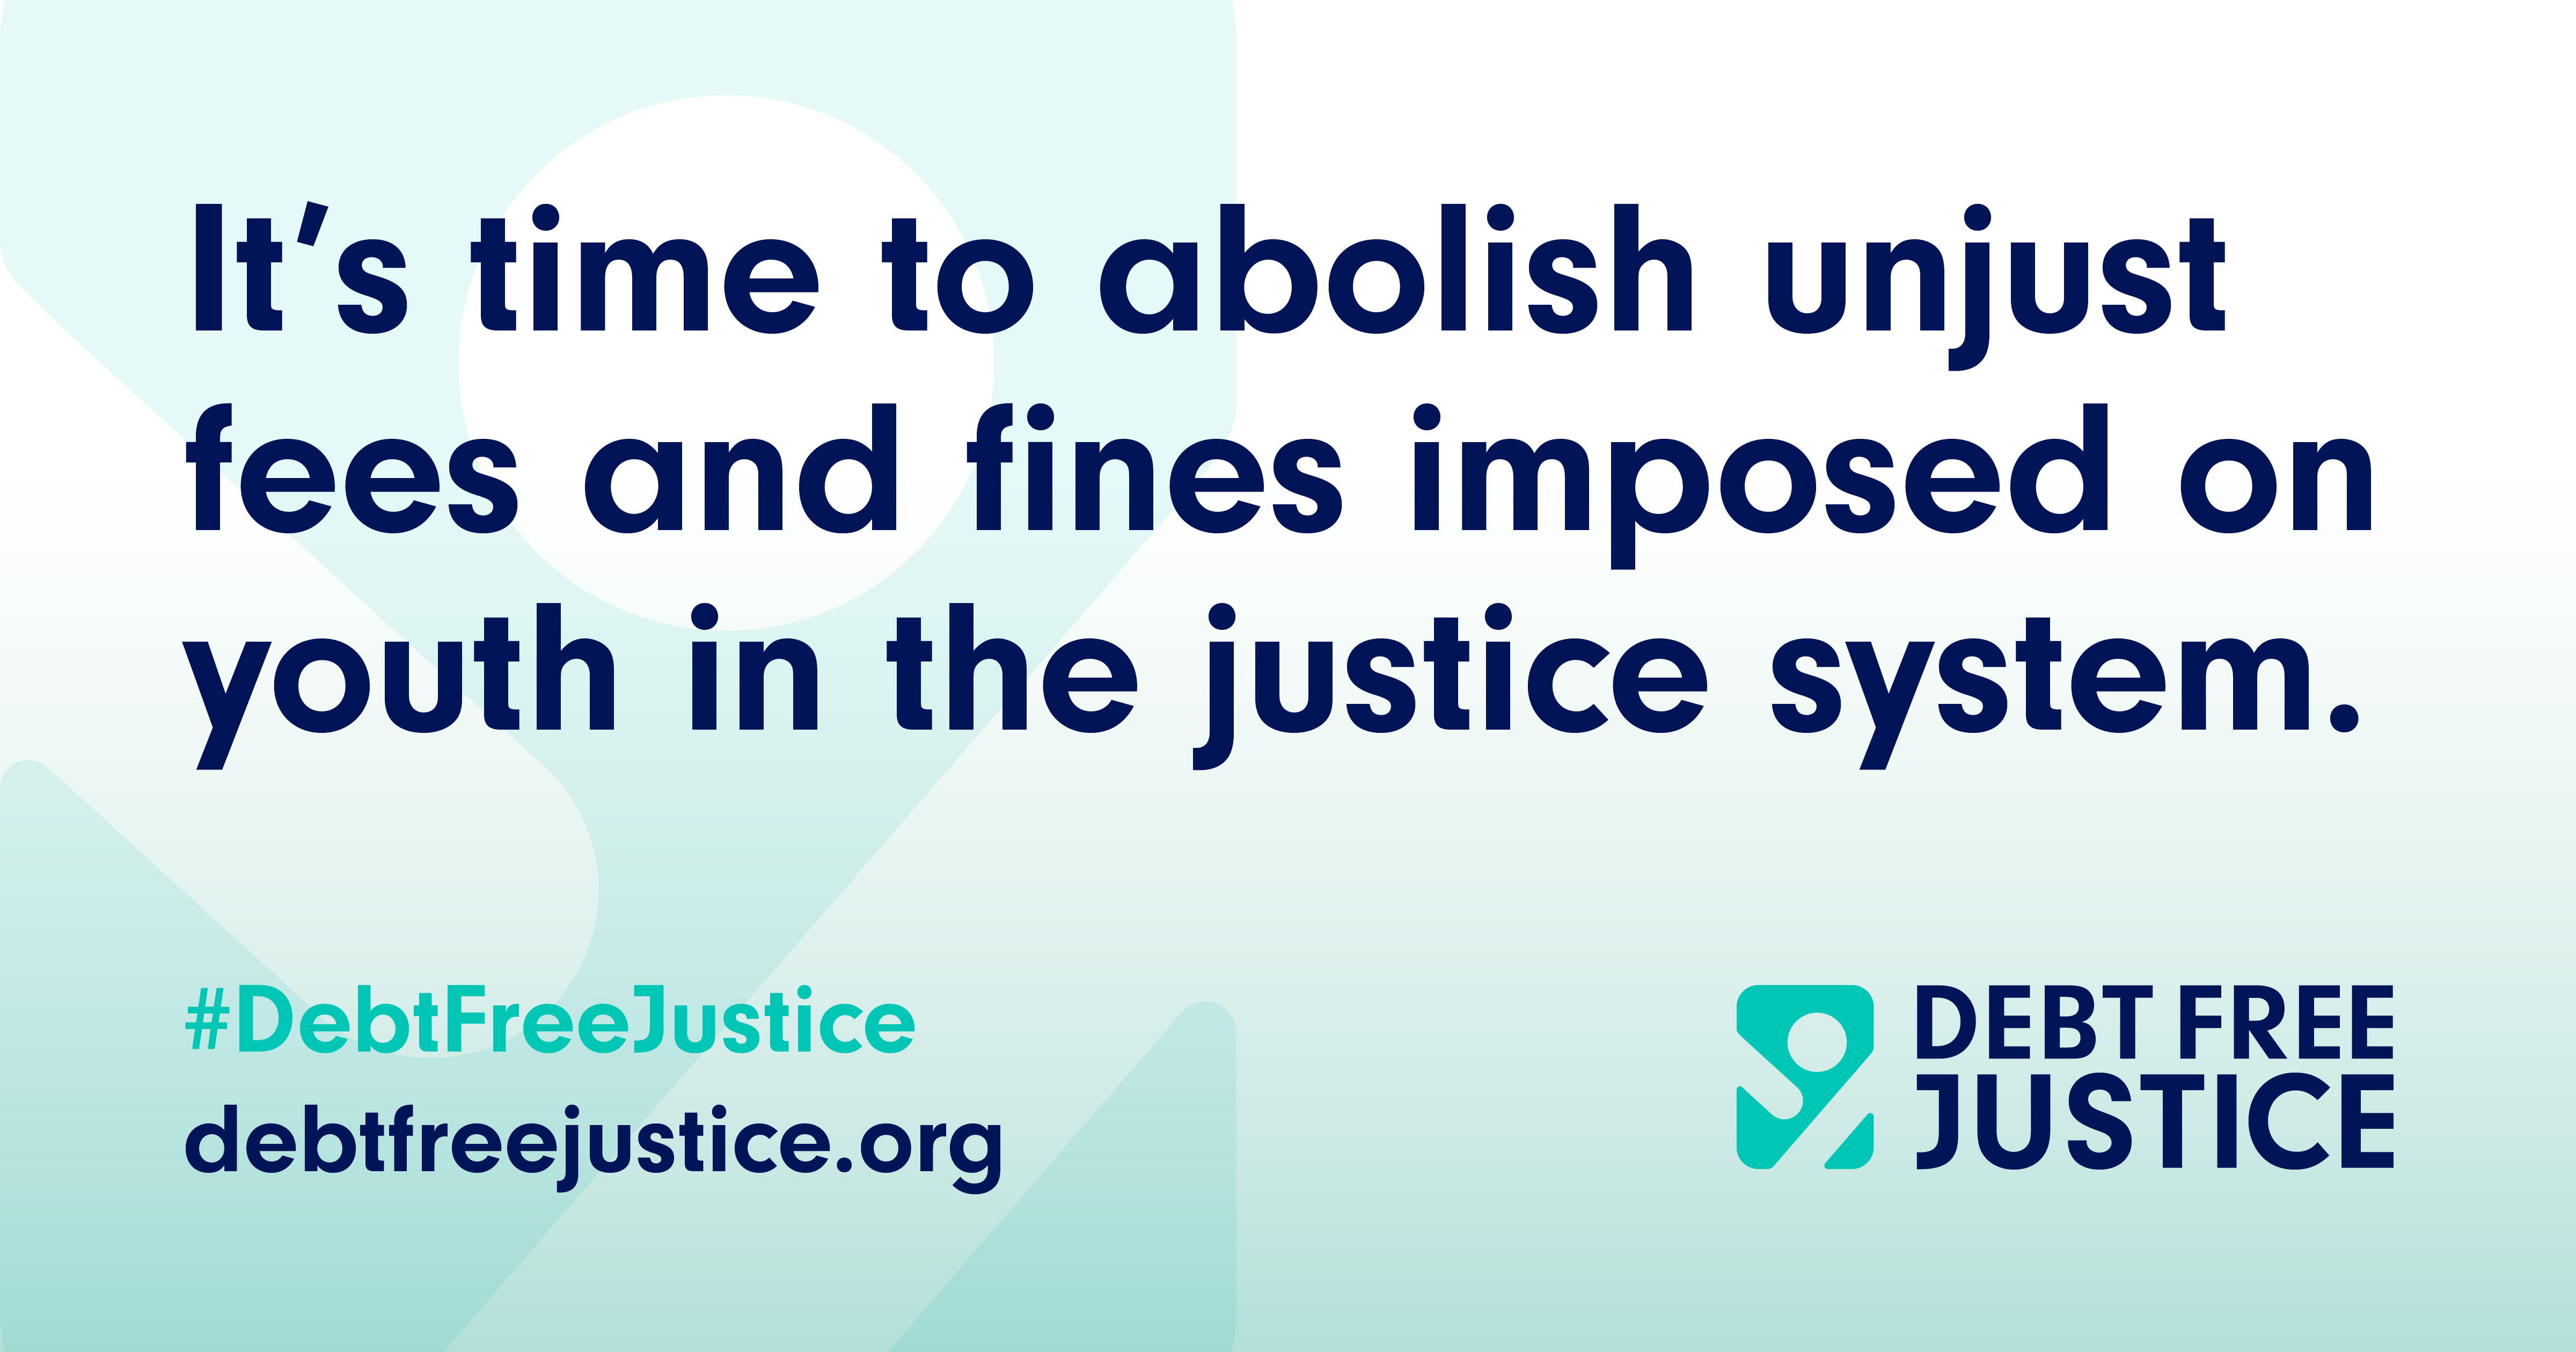 It's time to abolish unjust fees and fines imposed on youth in the justice system.